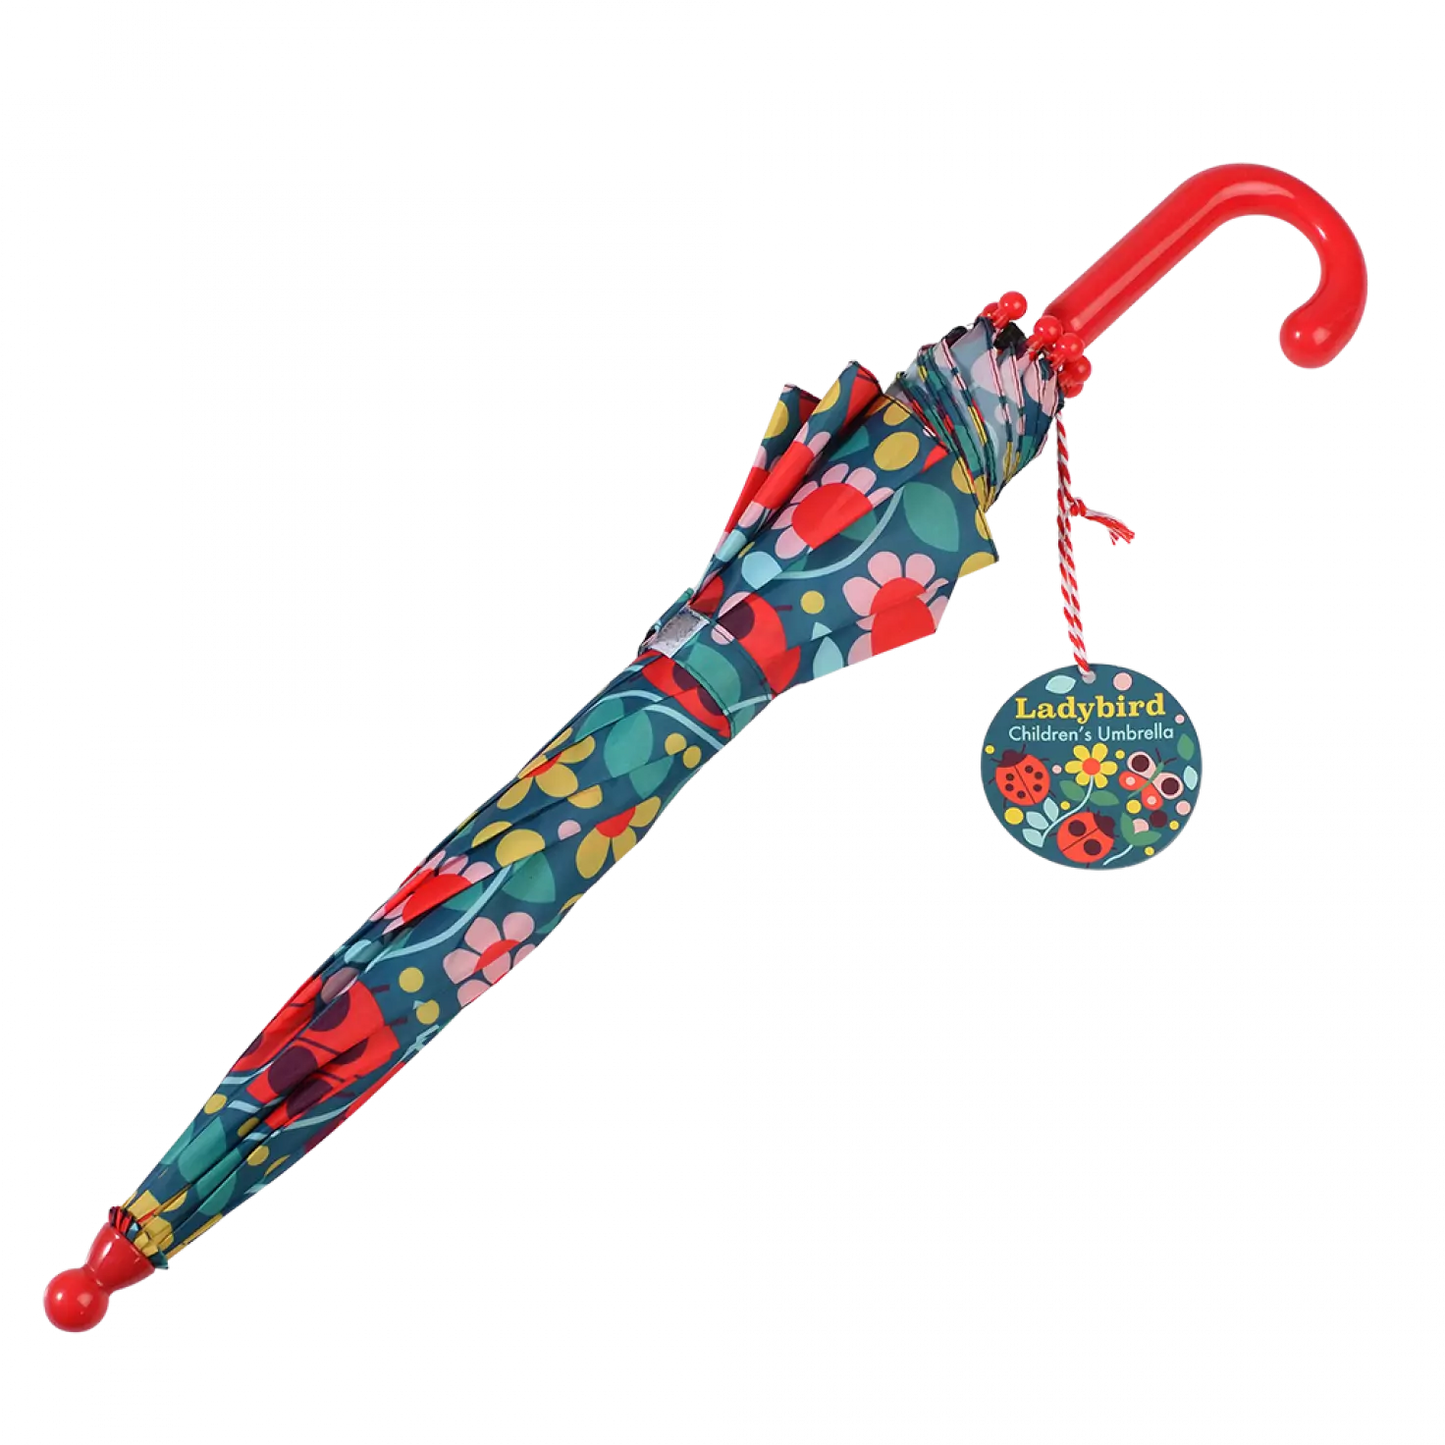 A childs umbrella by Rex London, style Ladybird, in blue with multi ladybird and floral print and red handle. Angled view of umbrella closed.